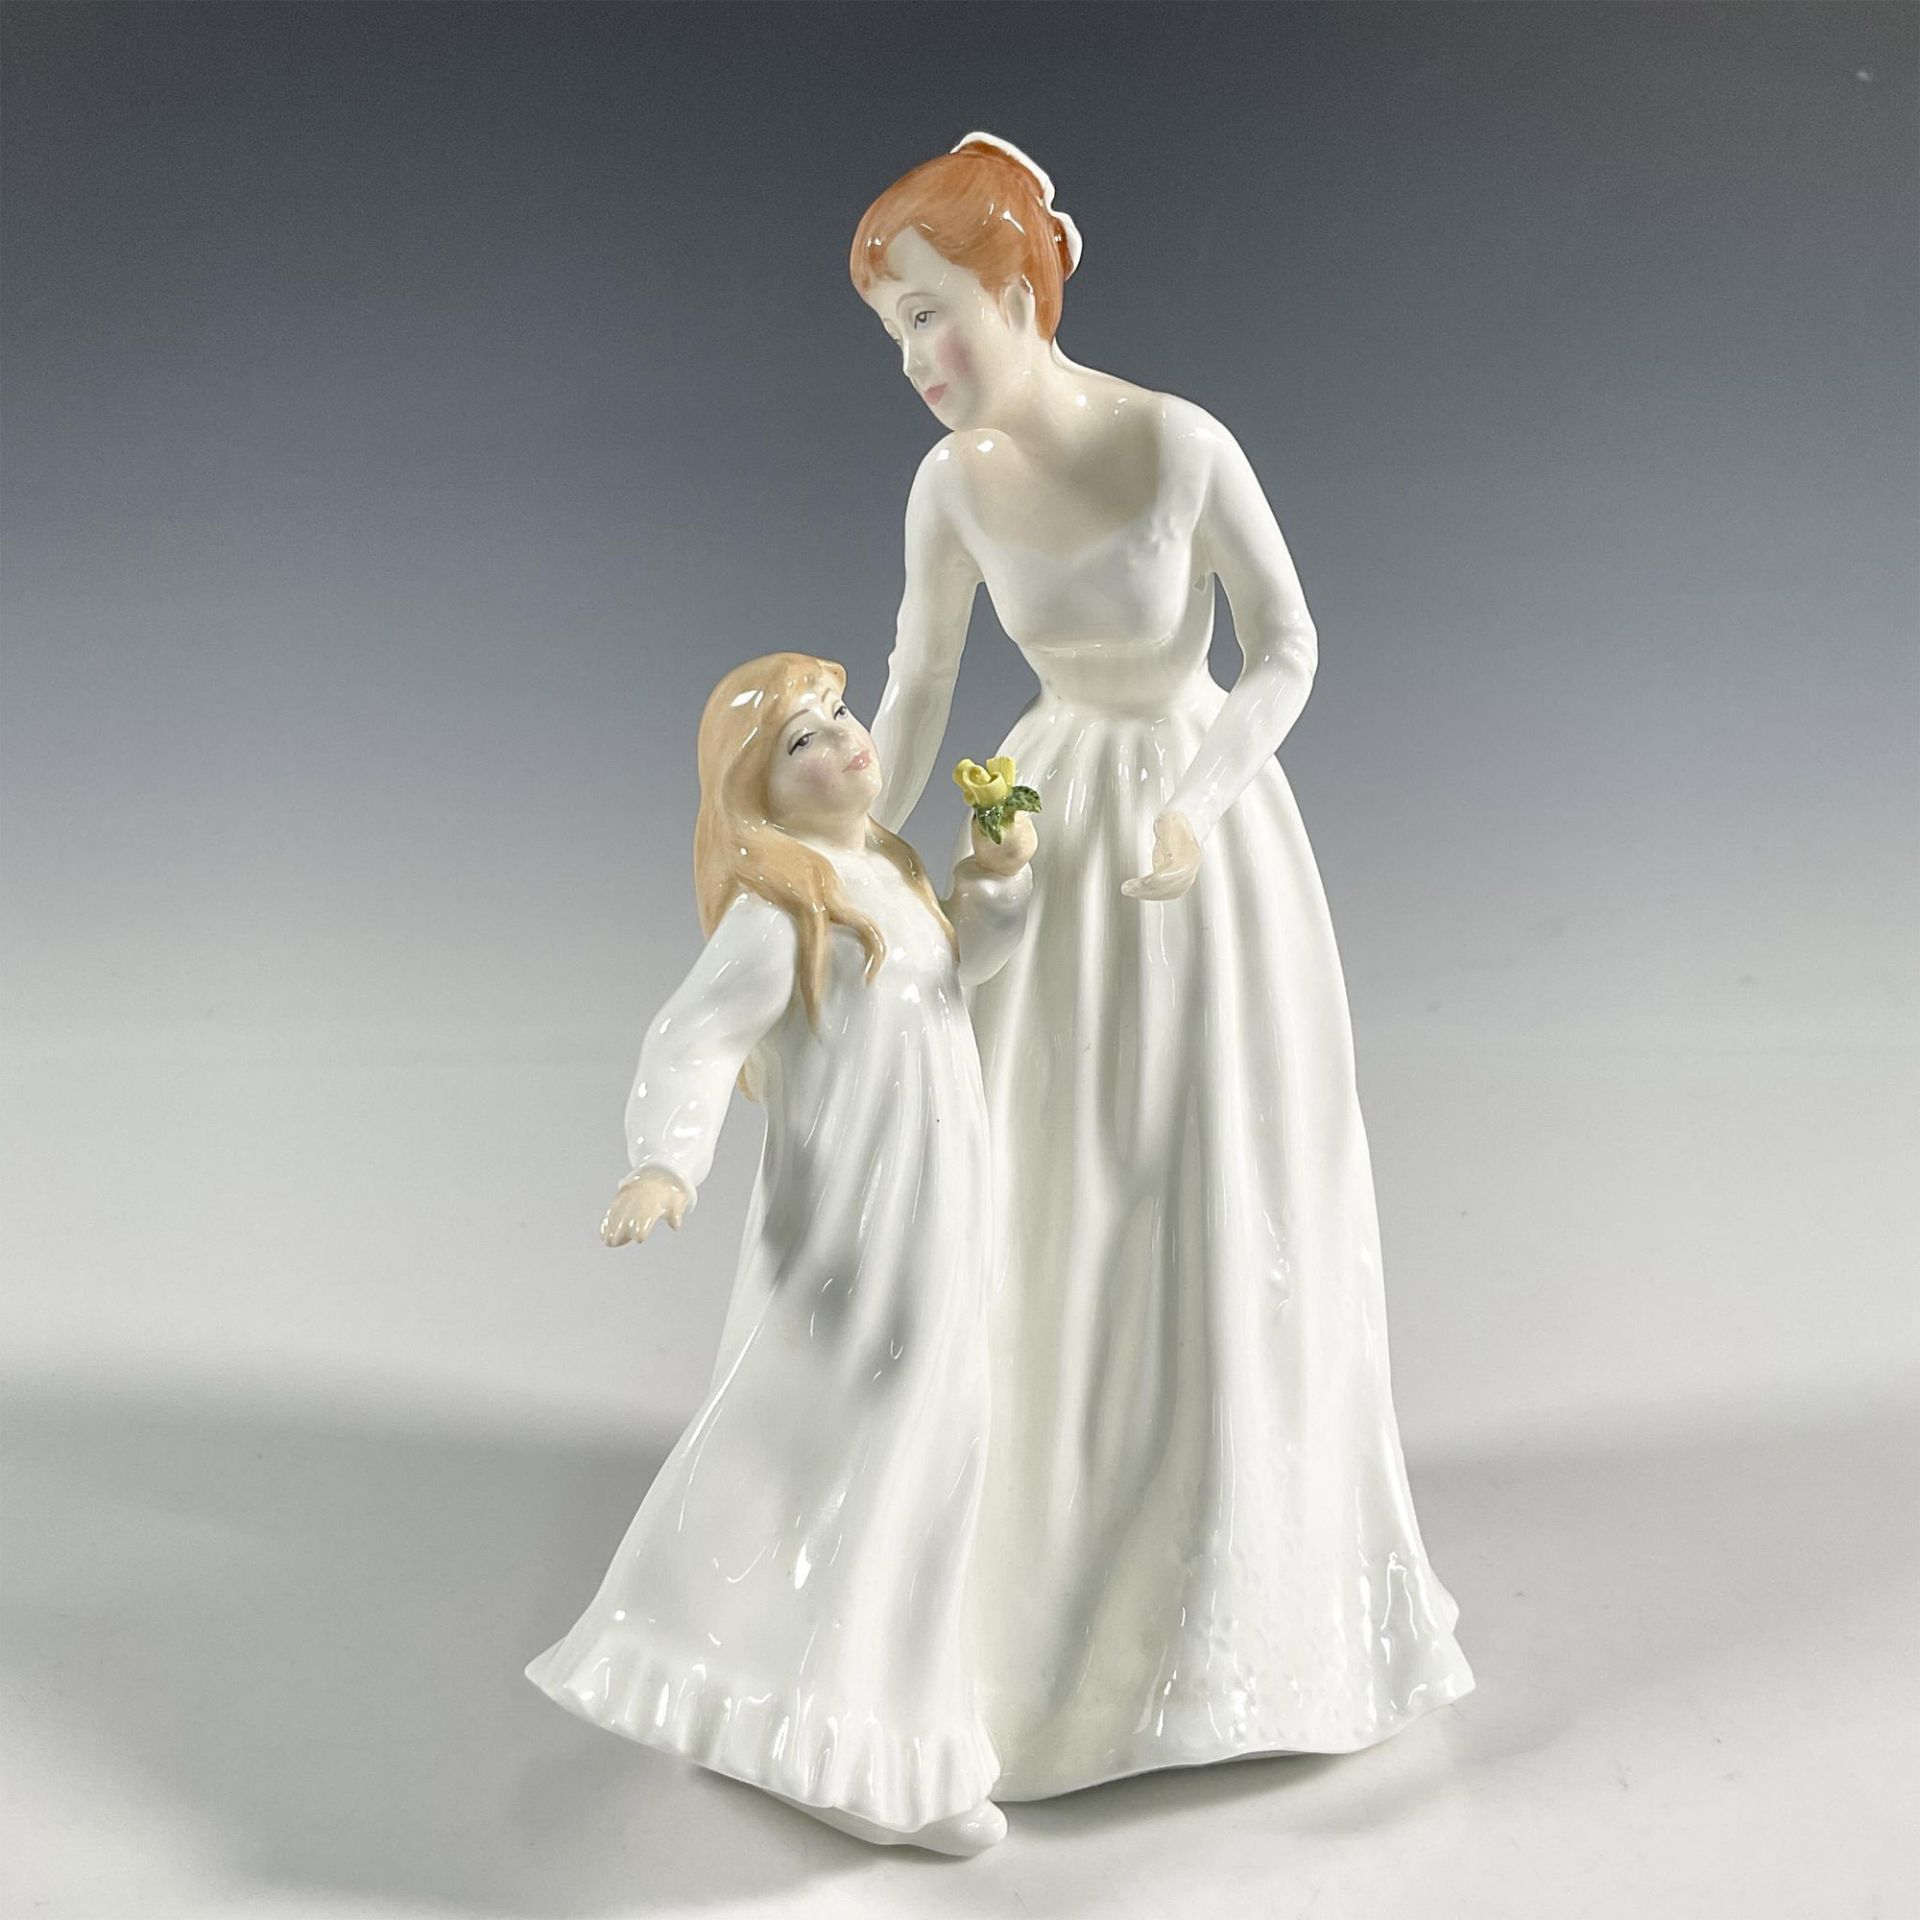 Just For You HN3355 - Royal Doulton Figurine